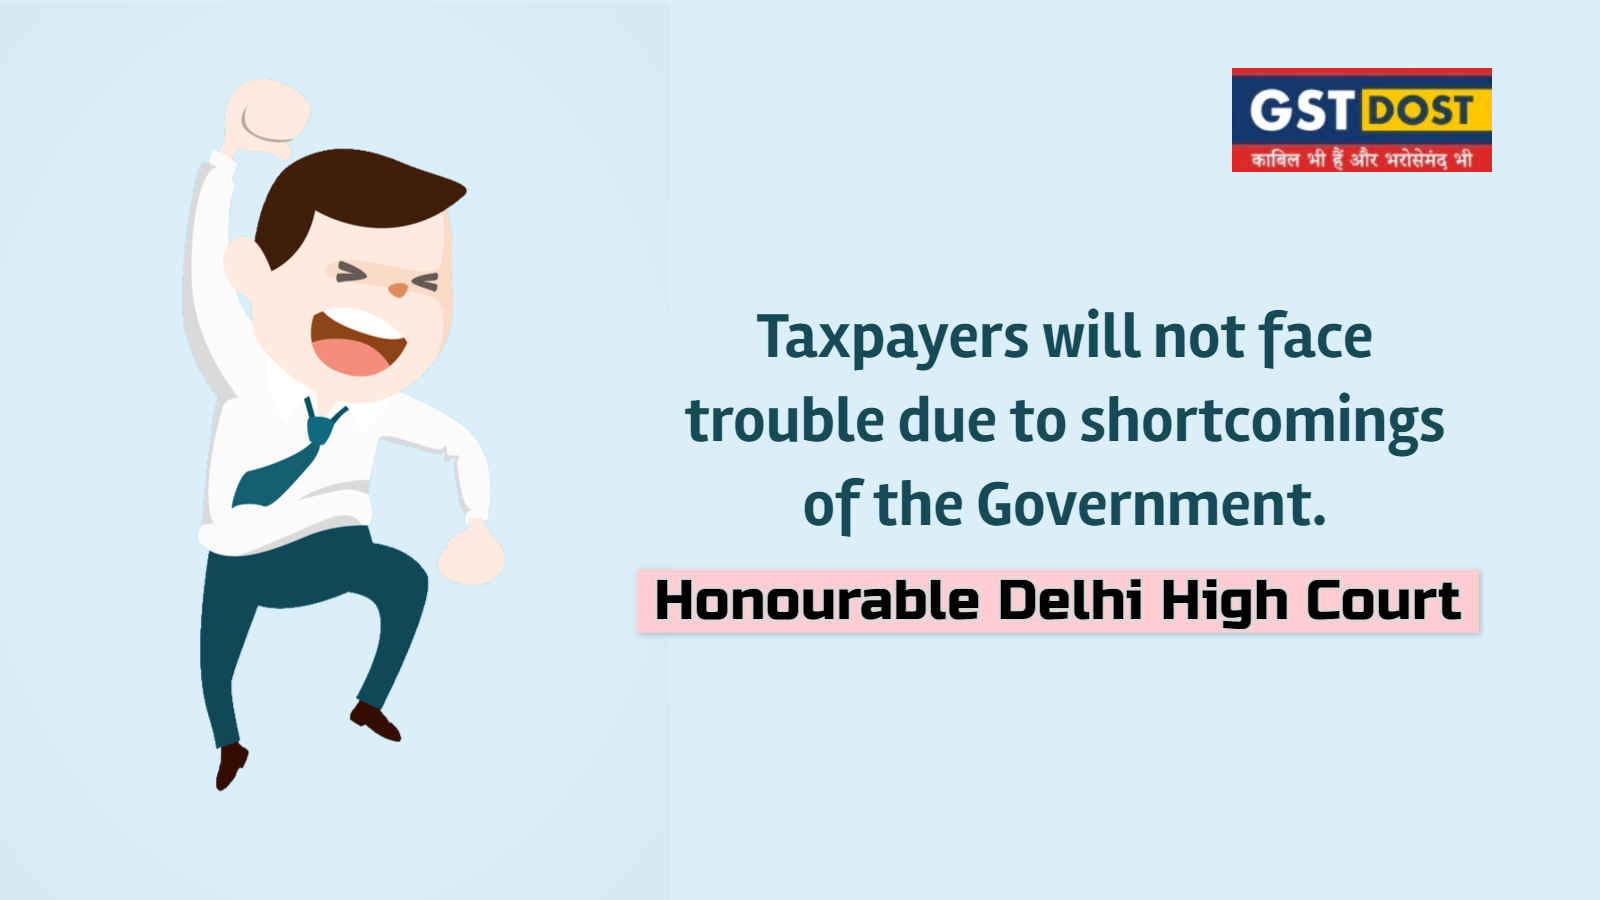 Taxpayers will not face trouble due to shortcomings of the Government